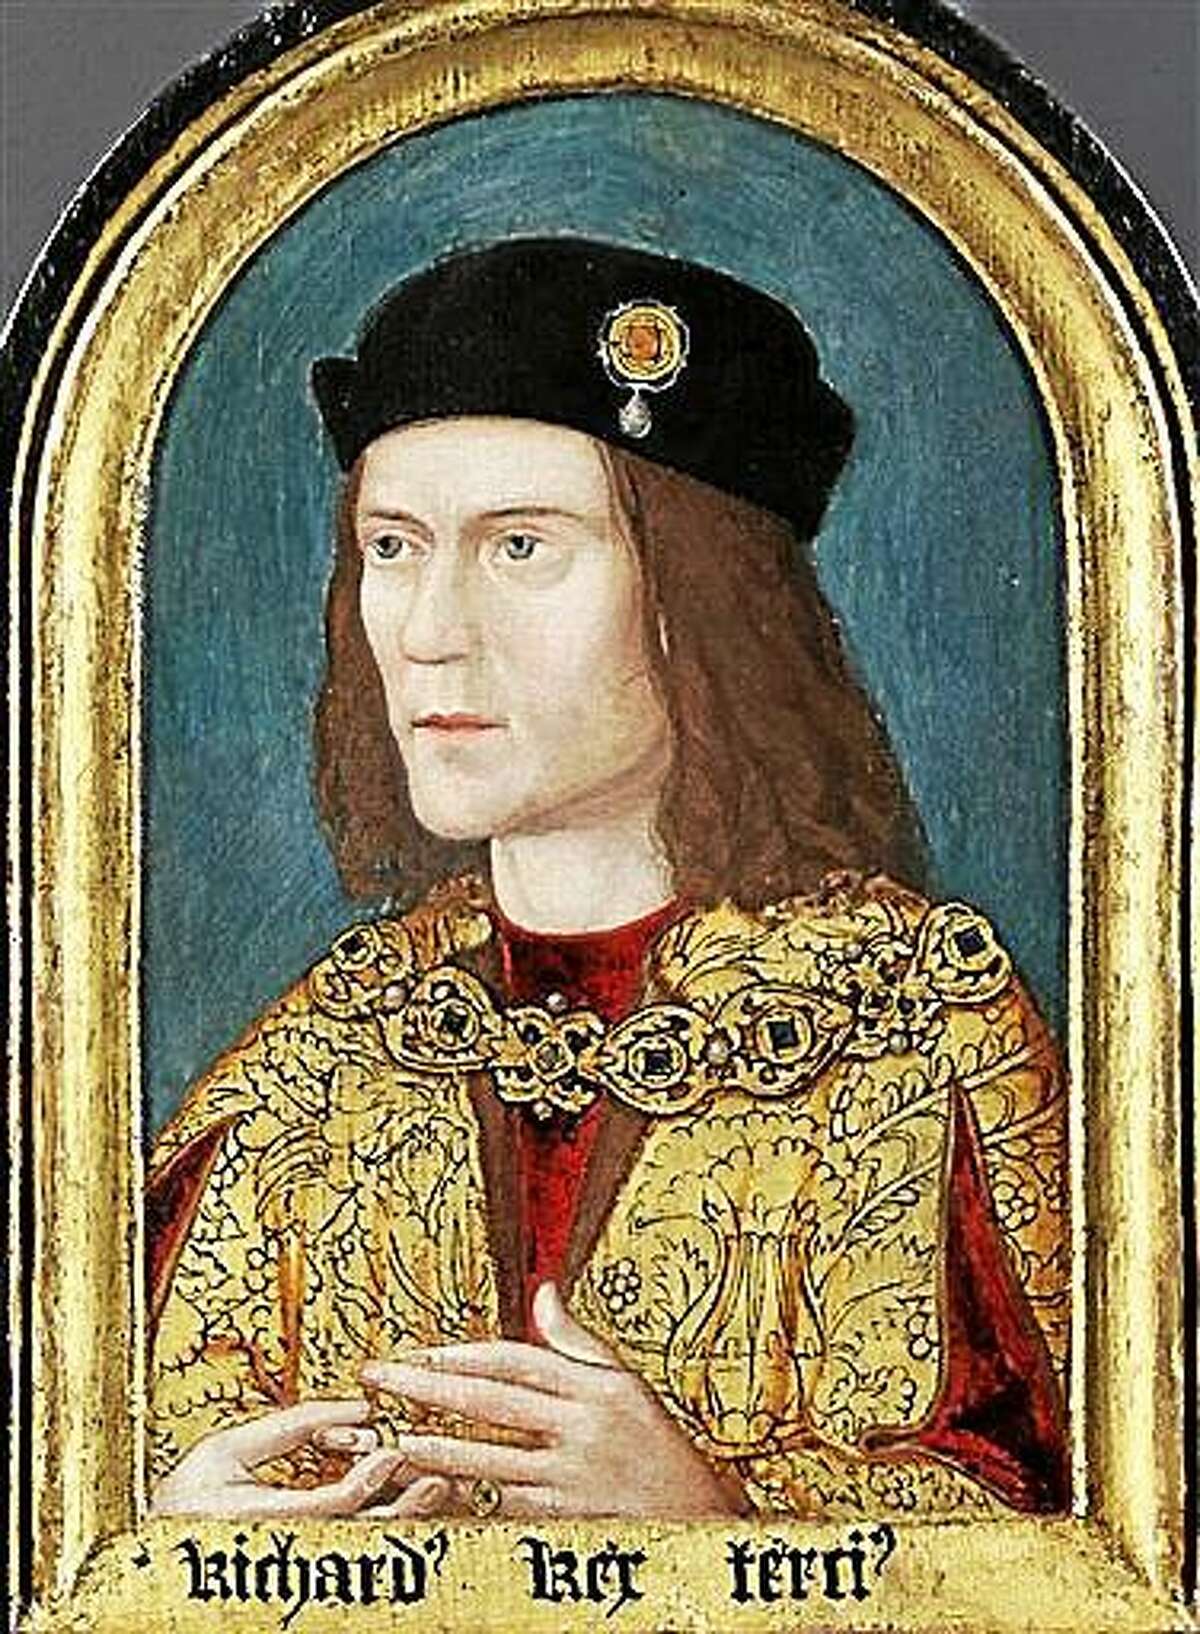 FILE- This is an undated file photo released by the University of Leicester, England, showing a portrait of Britain's King Richard II who's skeletal remains were found underneath a car park in Leicester, England, in September 2012, after being missing for around 500 years. According to research published Tuesday Dec. 2, 2014, in the Nature Communications journal, scientists compared the skeleton?s DNA to predict eye and hair color of the long lost king. However samples from living relatives found no matches, a discovery that could throw the nobility of some royal descendants into question, including Henry V, Henry VI and the entire Tudor royal dynasty. But Kevin Schurer, pro vice-chancellor of the University of Leicester, said England?s current royal family does not claim Richard III as a relative and shouldn?t be worried about the legitimacy of their royal line. (AP Photo/Society Of Antiquities Of London via University of Leicester, FILE)